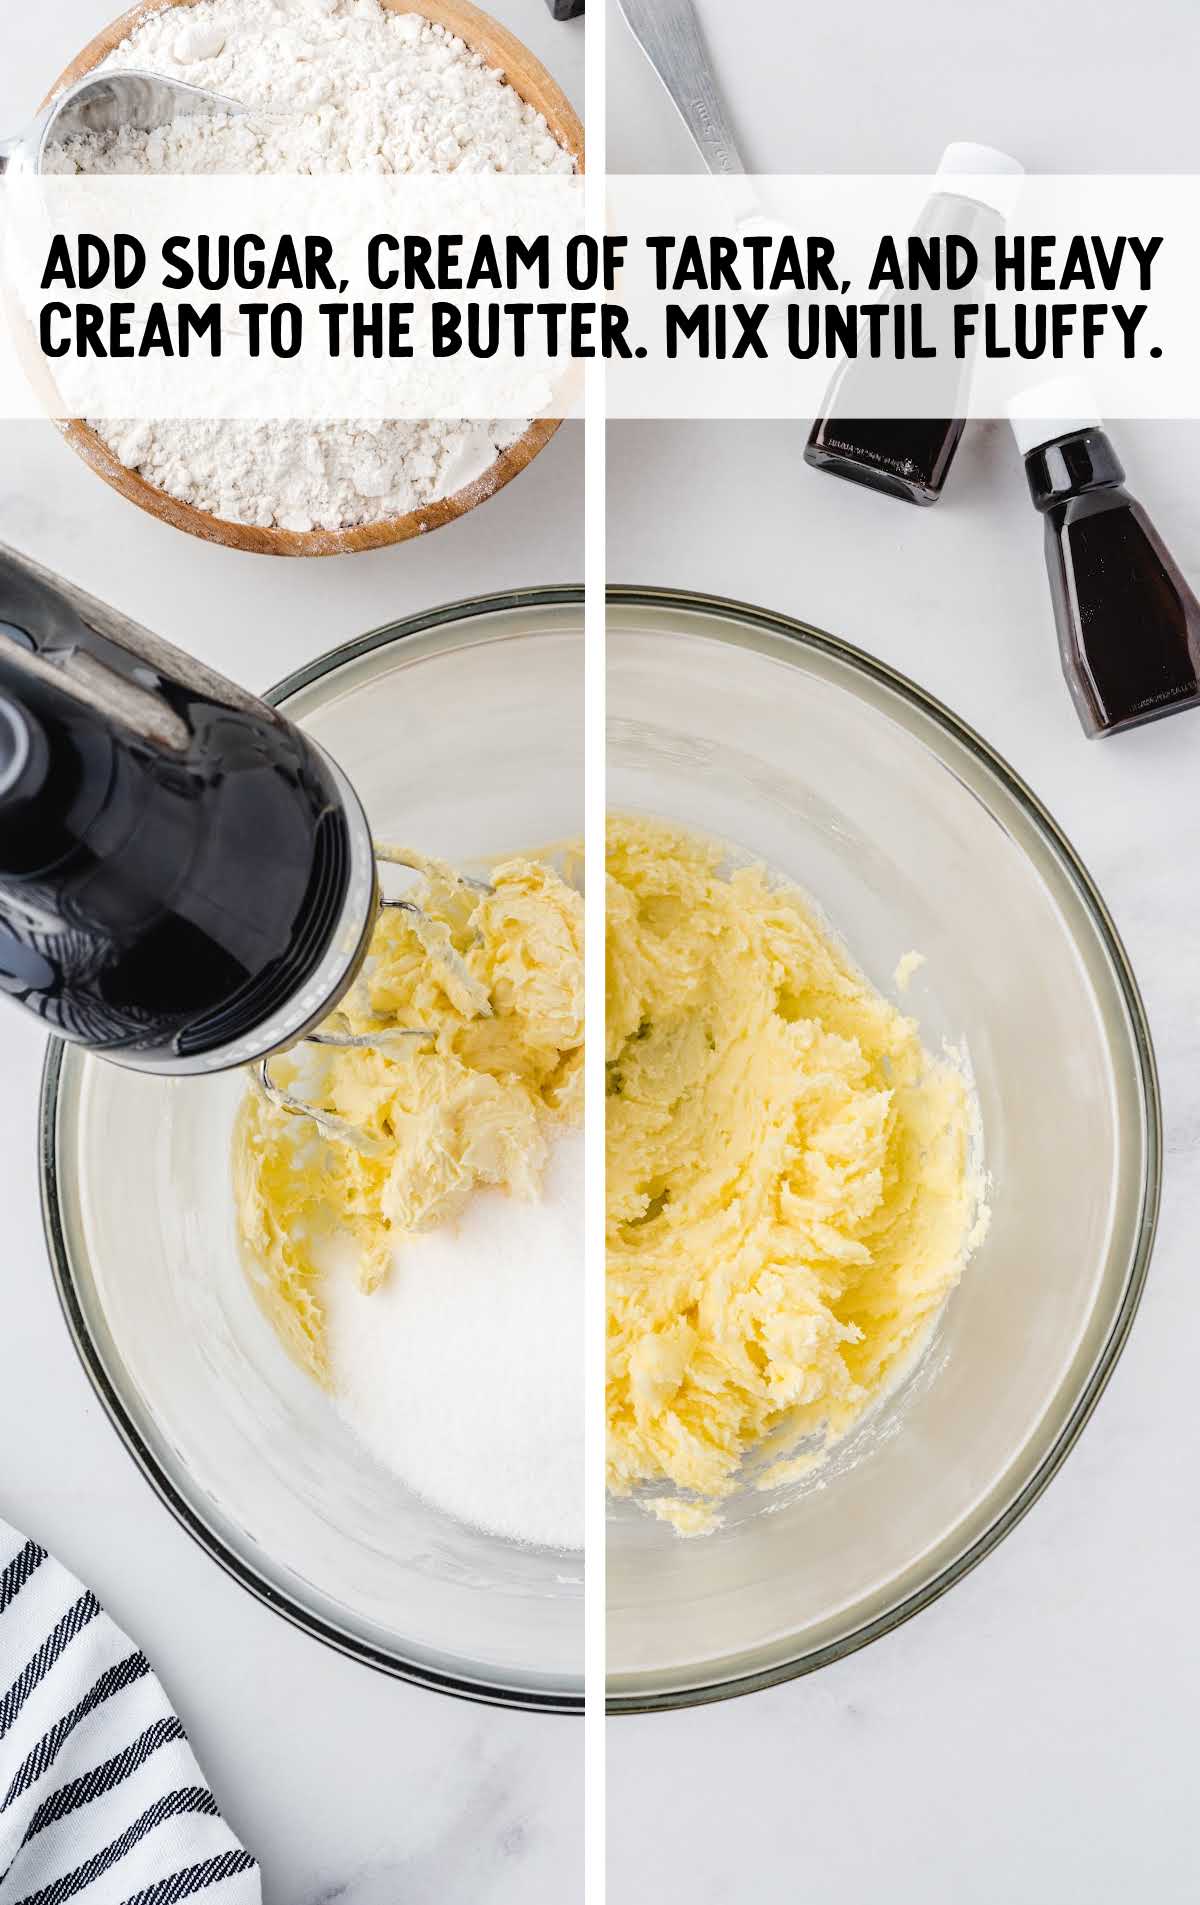 sugar and cream of tartar added to the butter in a bowl and blended together